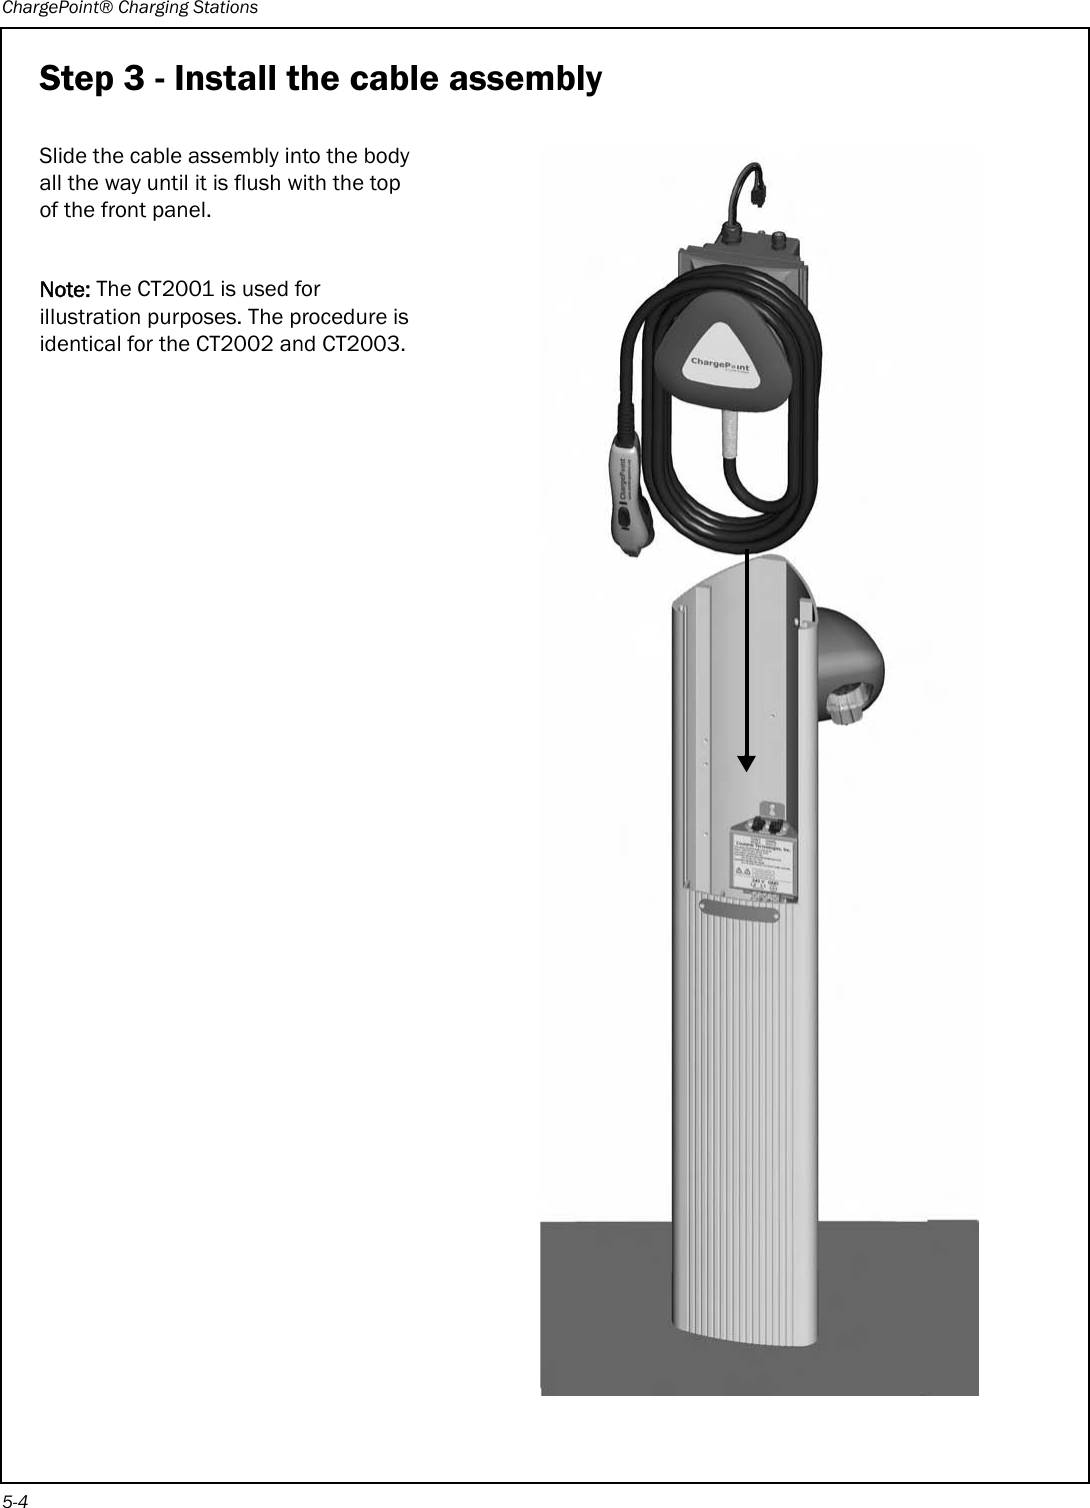 ChargePoint® Charging Stations5-4Step 3 - Install the cable assemblySlide the cable assembly into the body all the way until it is flush with the top of the front panel.Note: The CT2001 is used for illustration purposes. The procedure is identical for the CT2002 and CT2003.